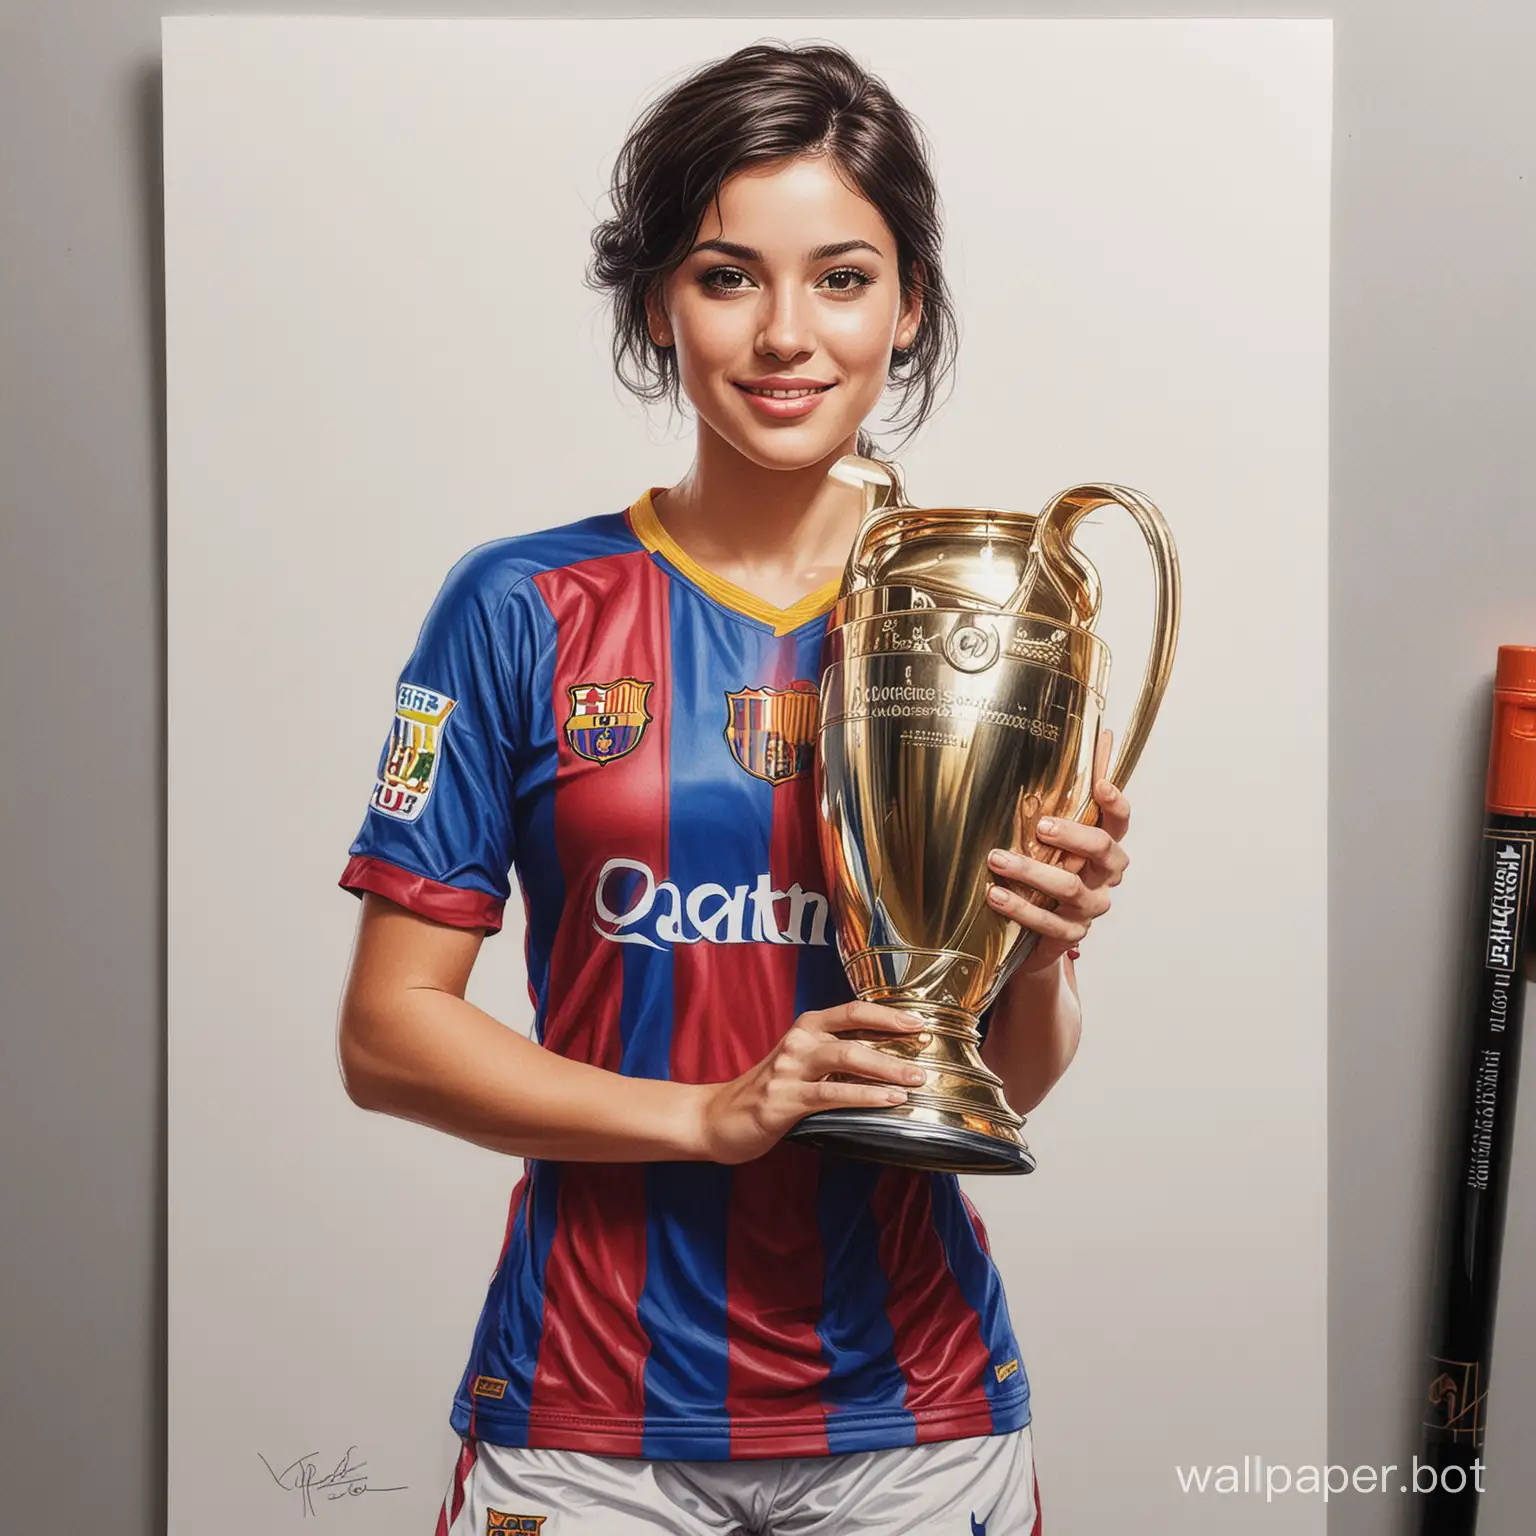 sketch young Veronica Gonzalez 26 years old dark short hair 4 cup size narrow waist in Barcelona football uniform holding a large Champions League trophy white background high realism drawing with colored marker sexy